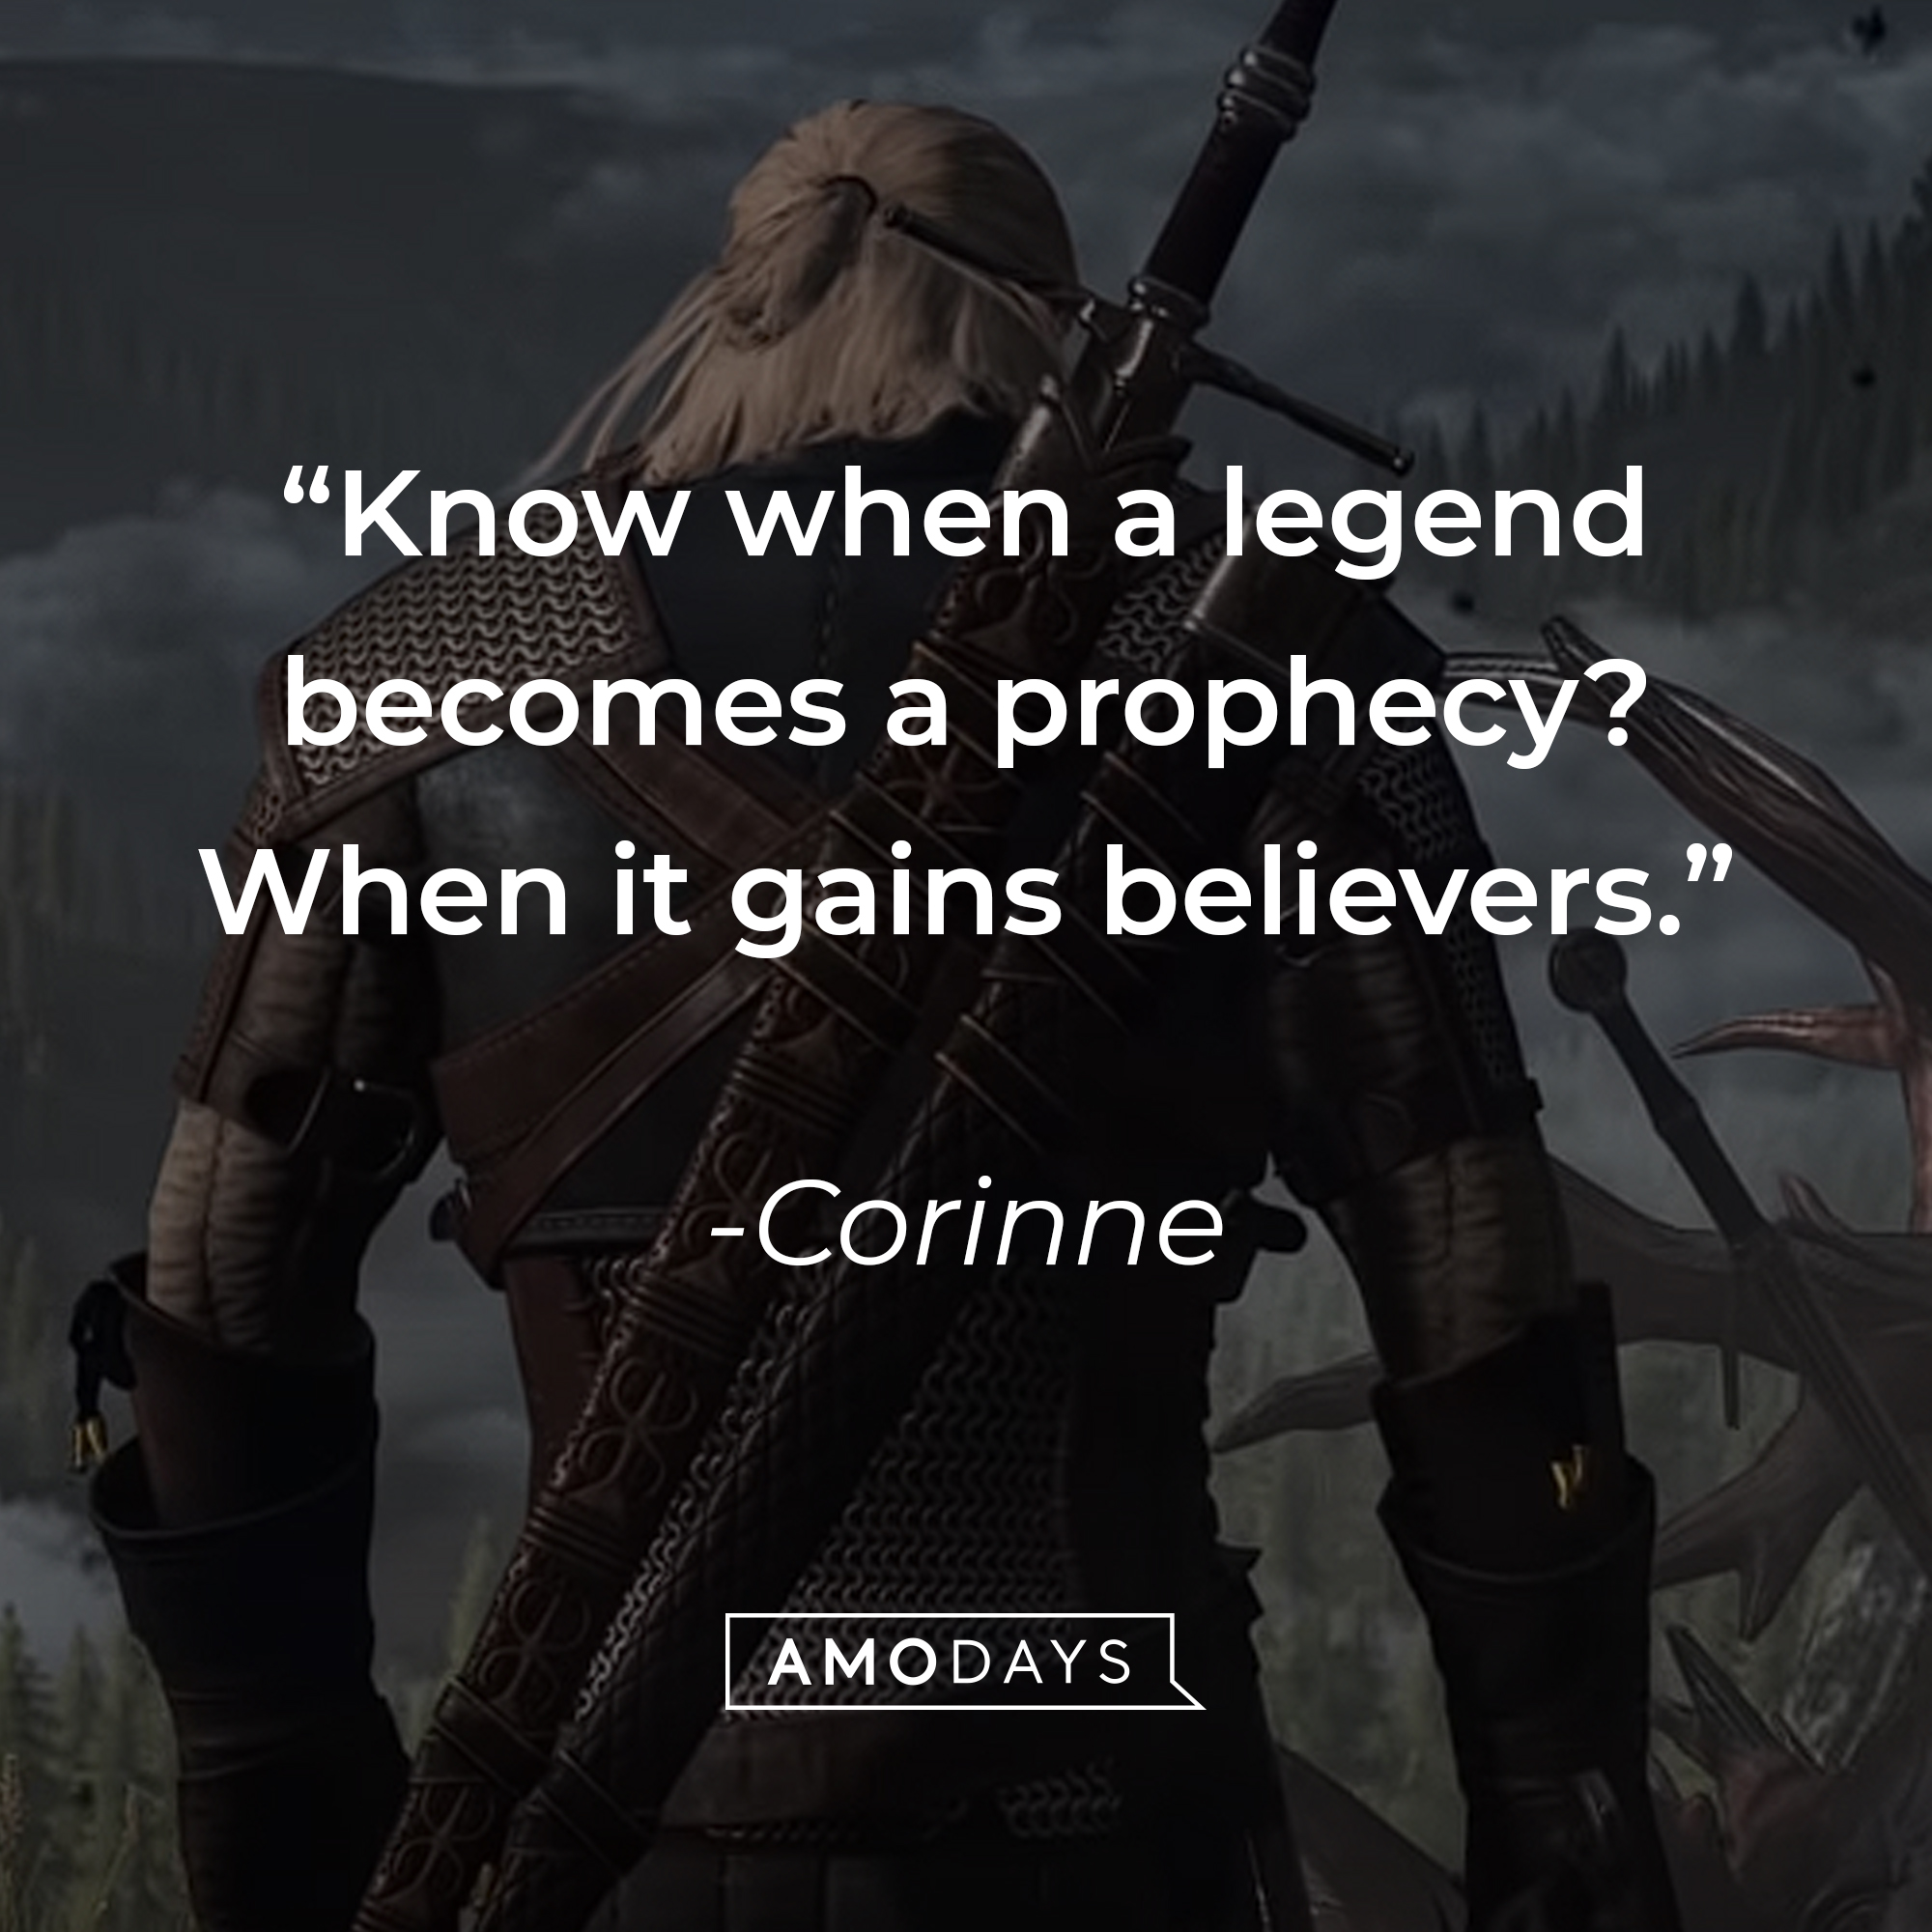 Corinne's quote: “Know when a legend becomes a prophecy? When it gains believers.” | Source: youtube.com/CDPRED